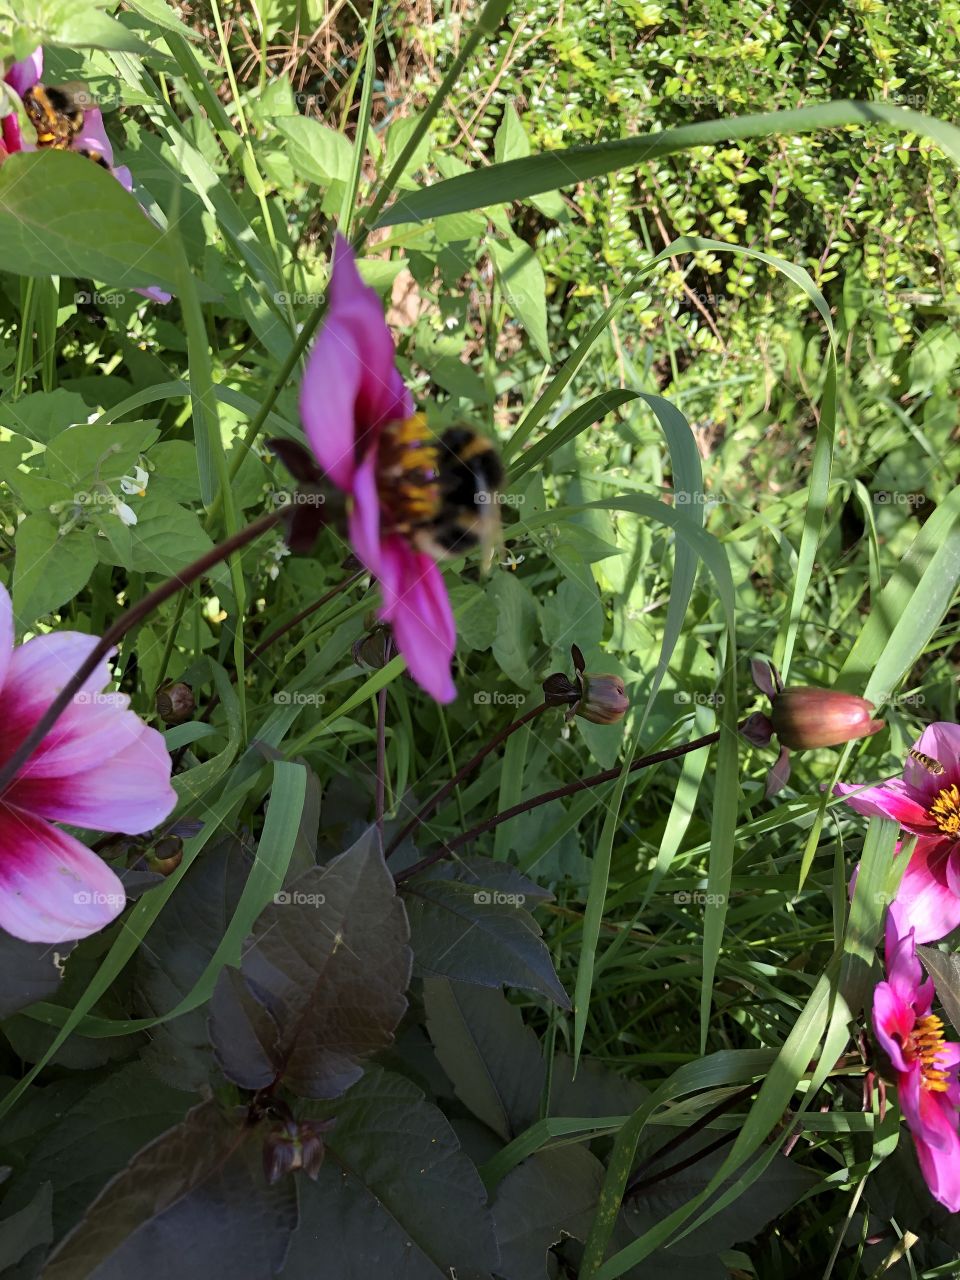 Bumble bee on pretty flower 